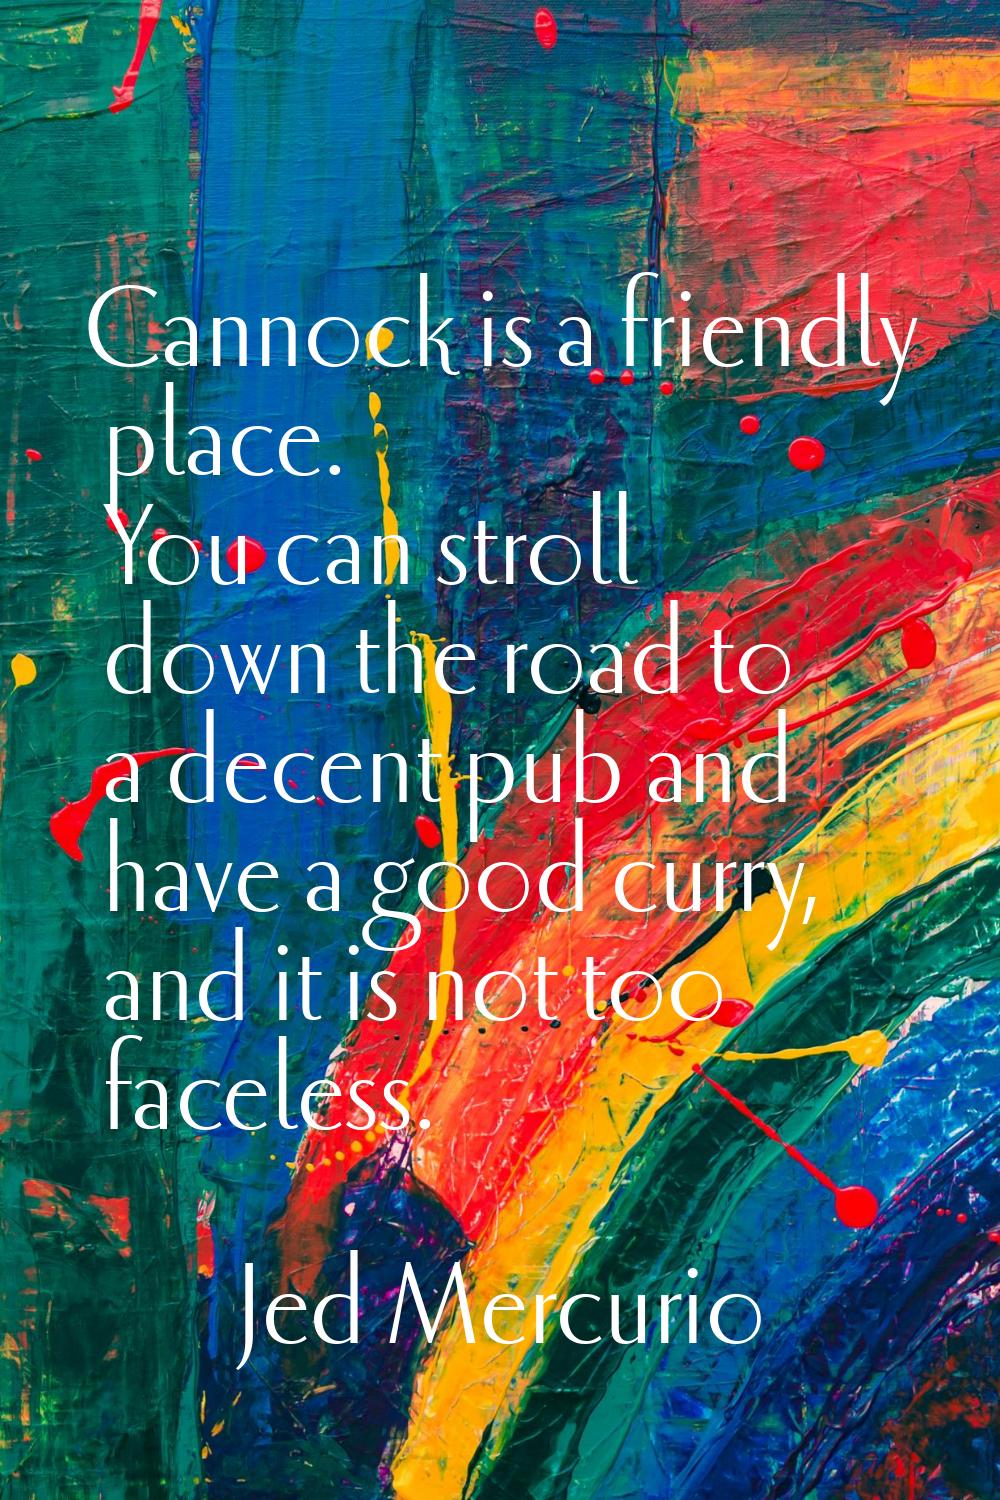 Cannock is a friendly place. You can stroll down the road to a decent pub and have a good curry, an